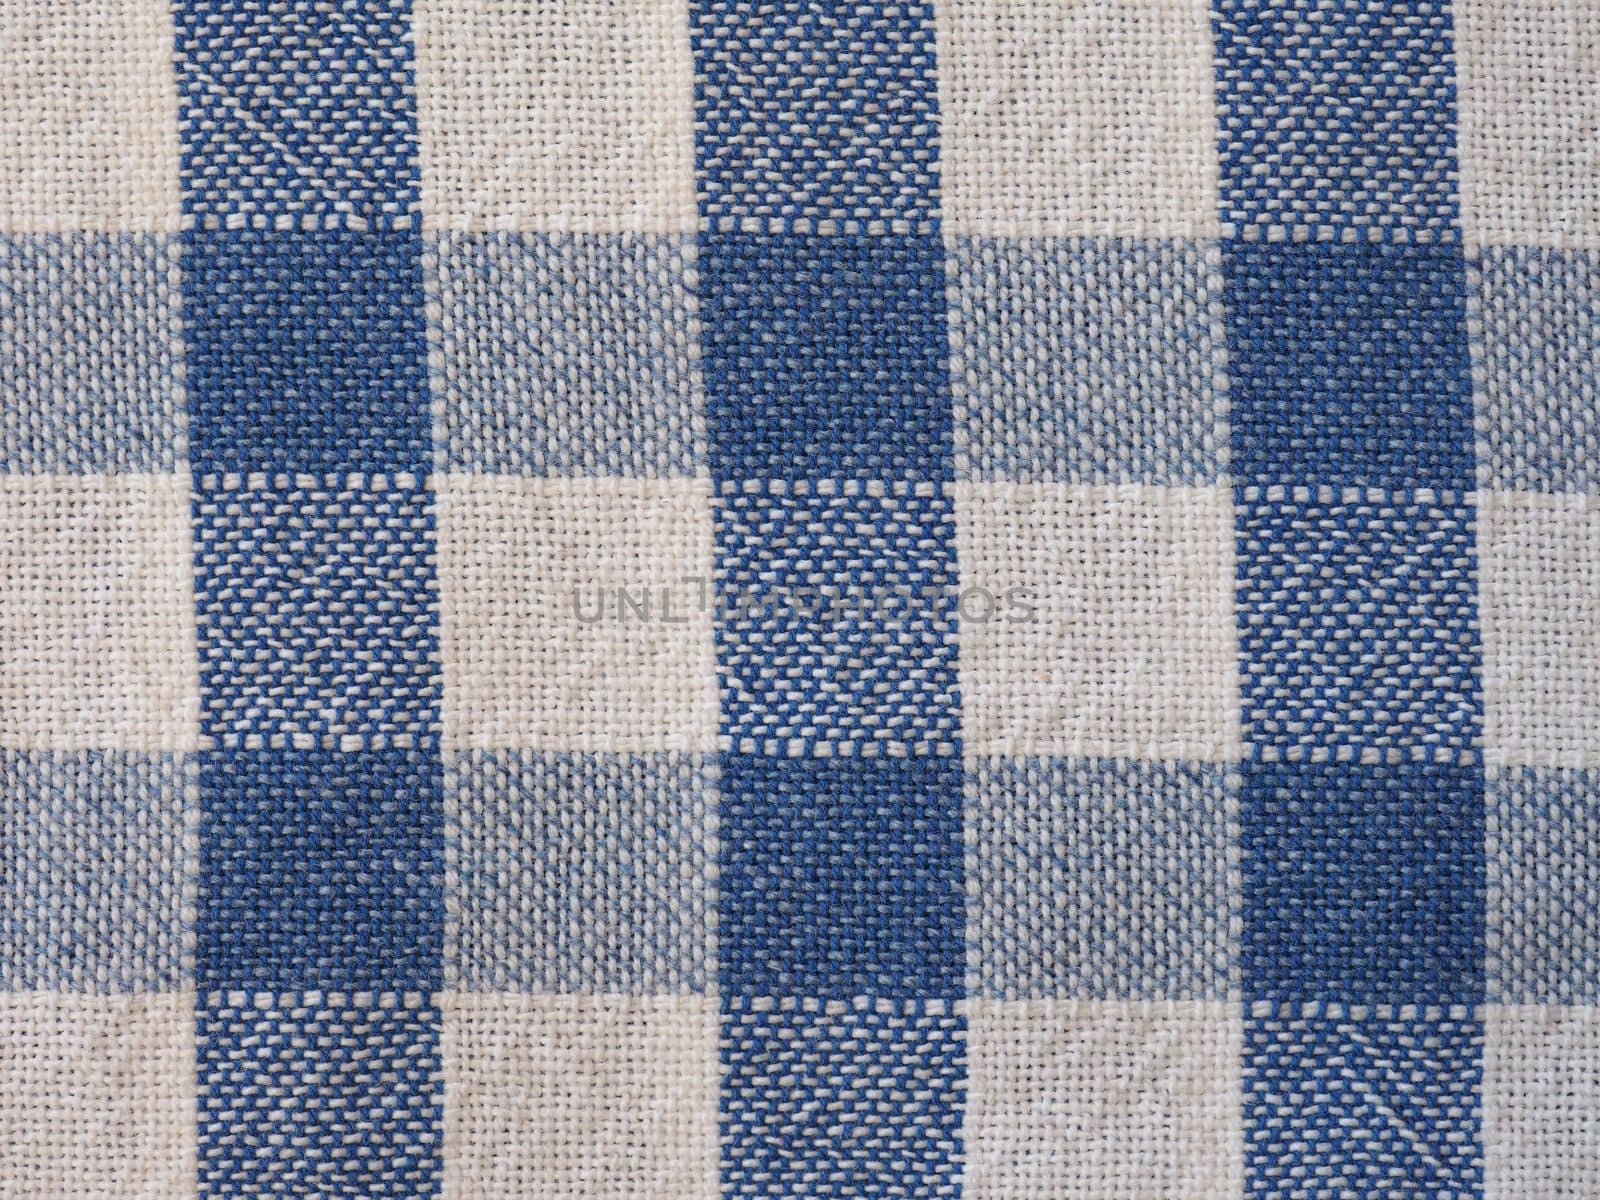 blue and white checkered fabric background by claudiodivizia